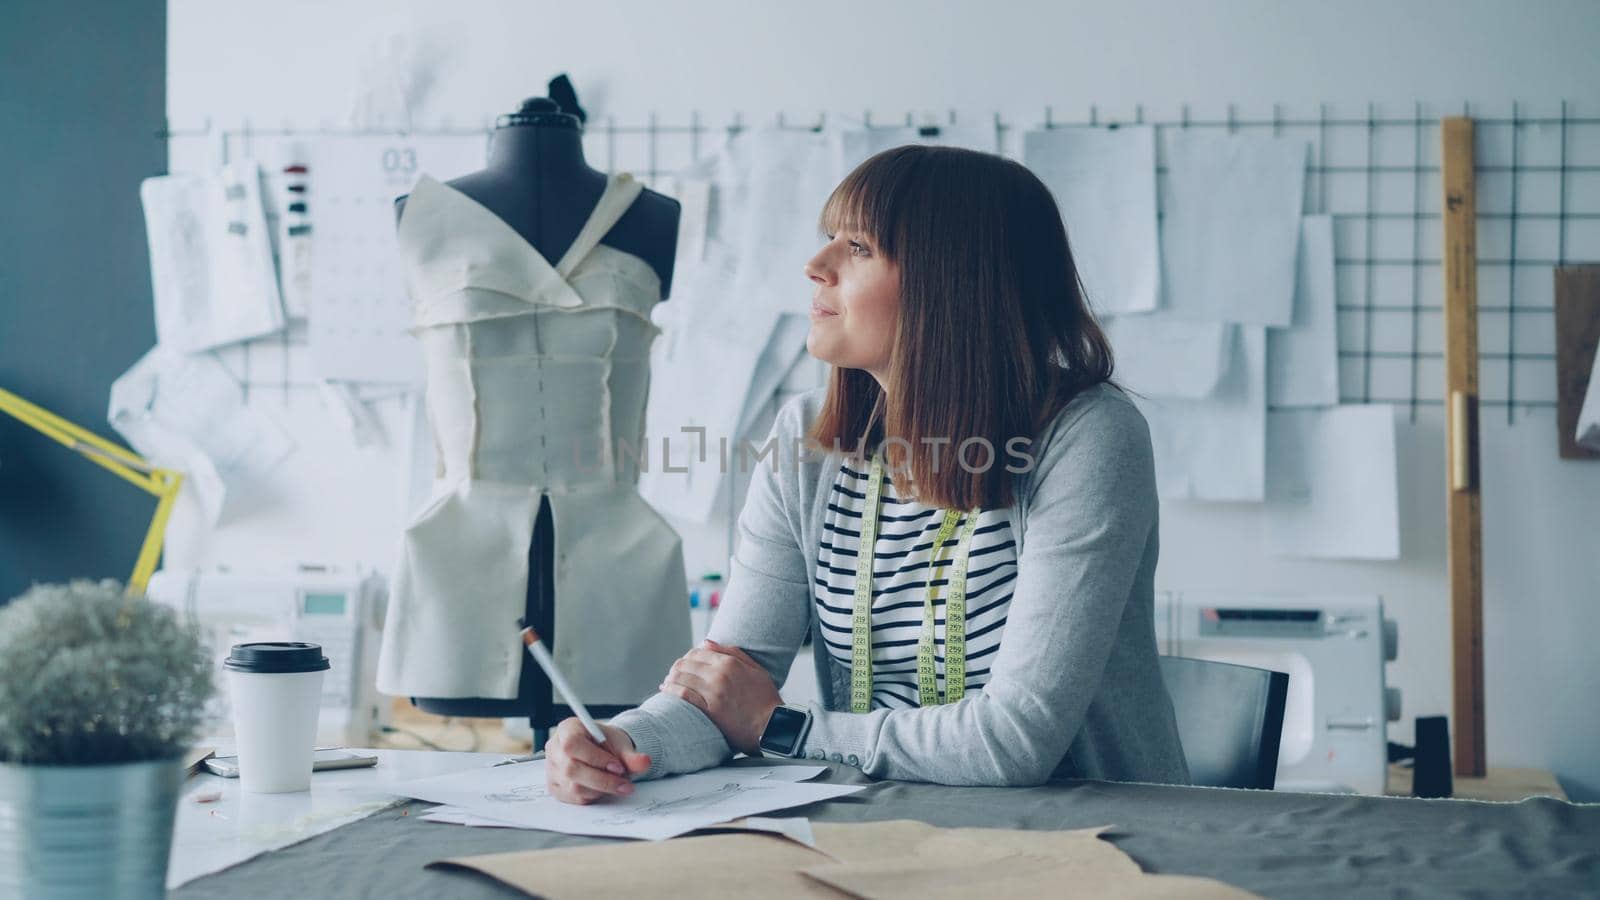 Clothing designer in small start-up business is drawing sketches for women's clothes and thinking about next fashion show. Inspiration and creative thinking concept. by silverkblack